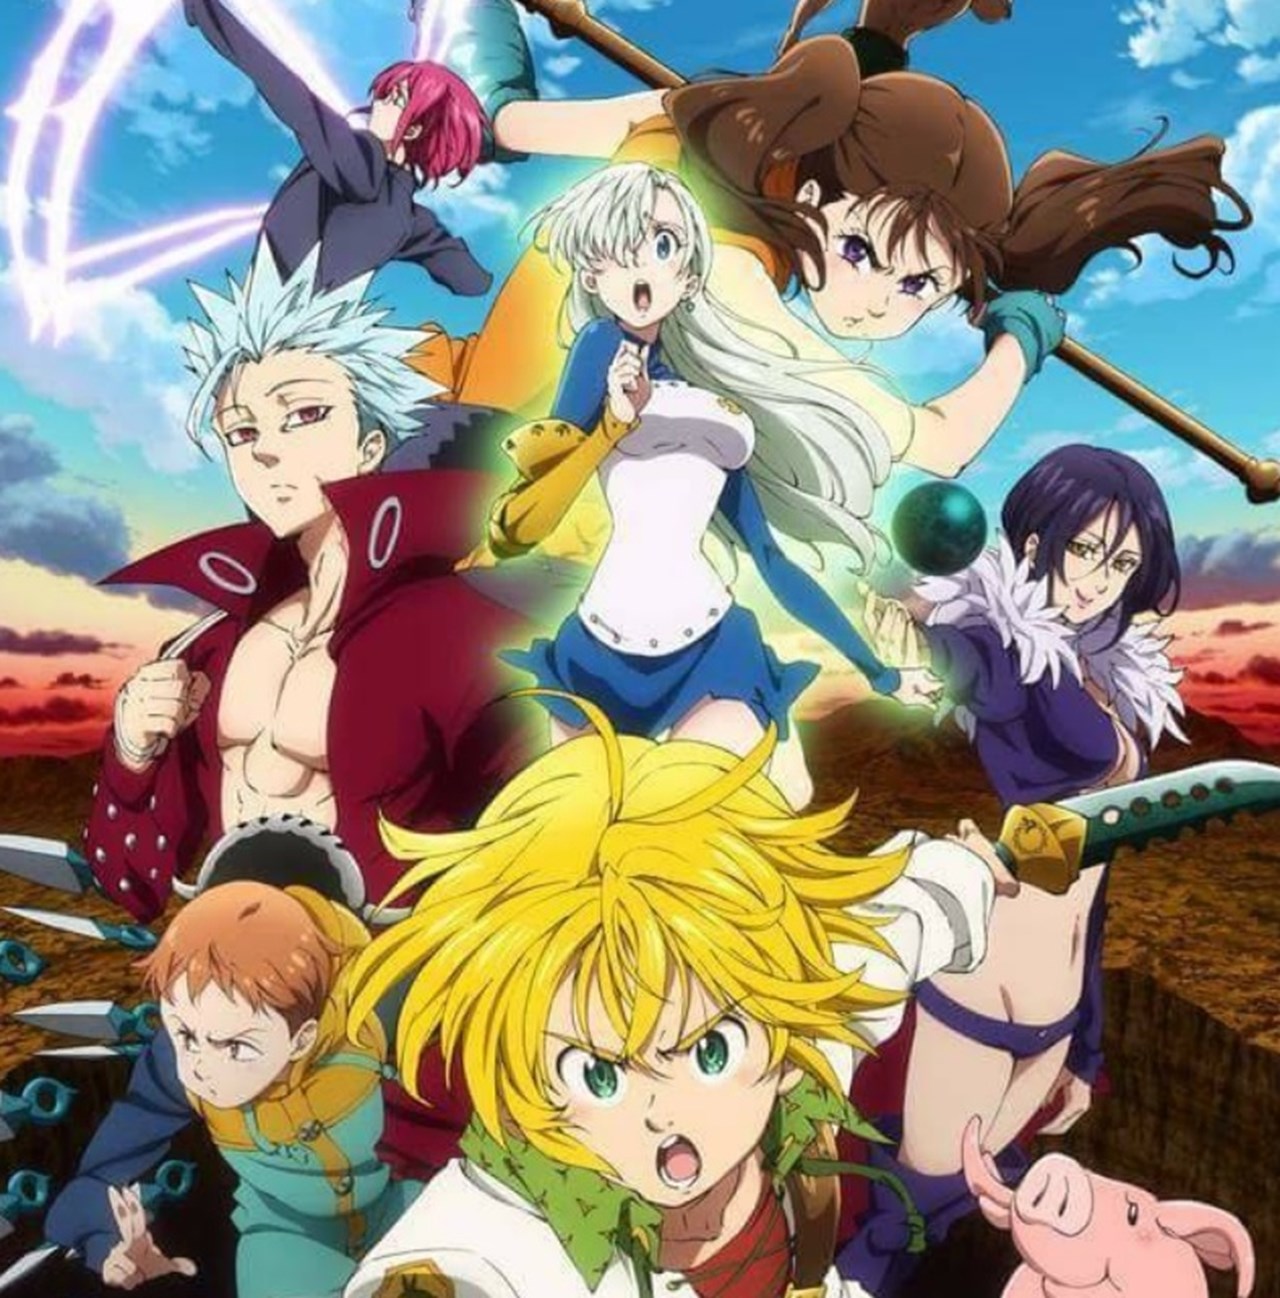 Seven Deadly Sins Manga Gets New Anime in October - News - Anime